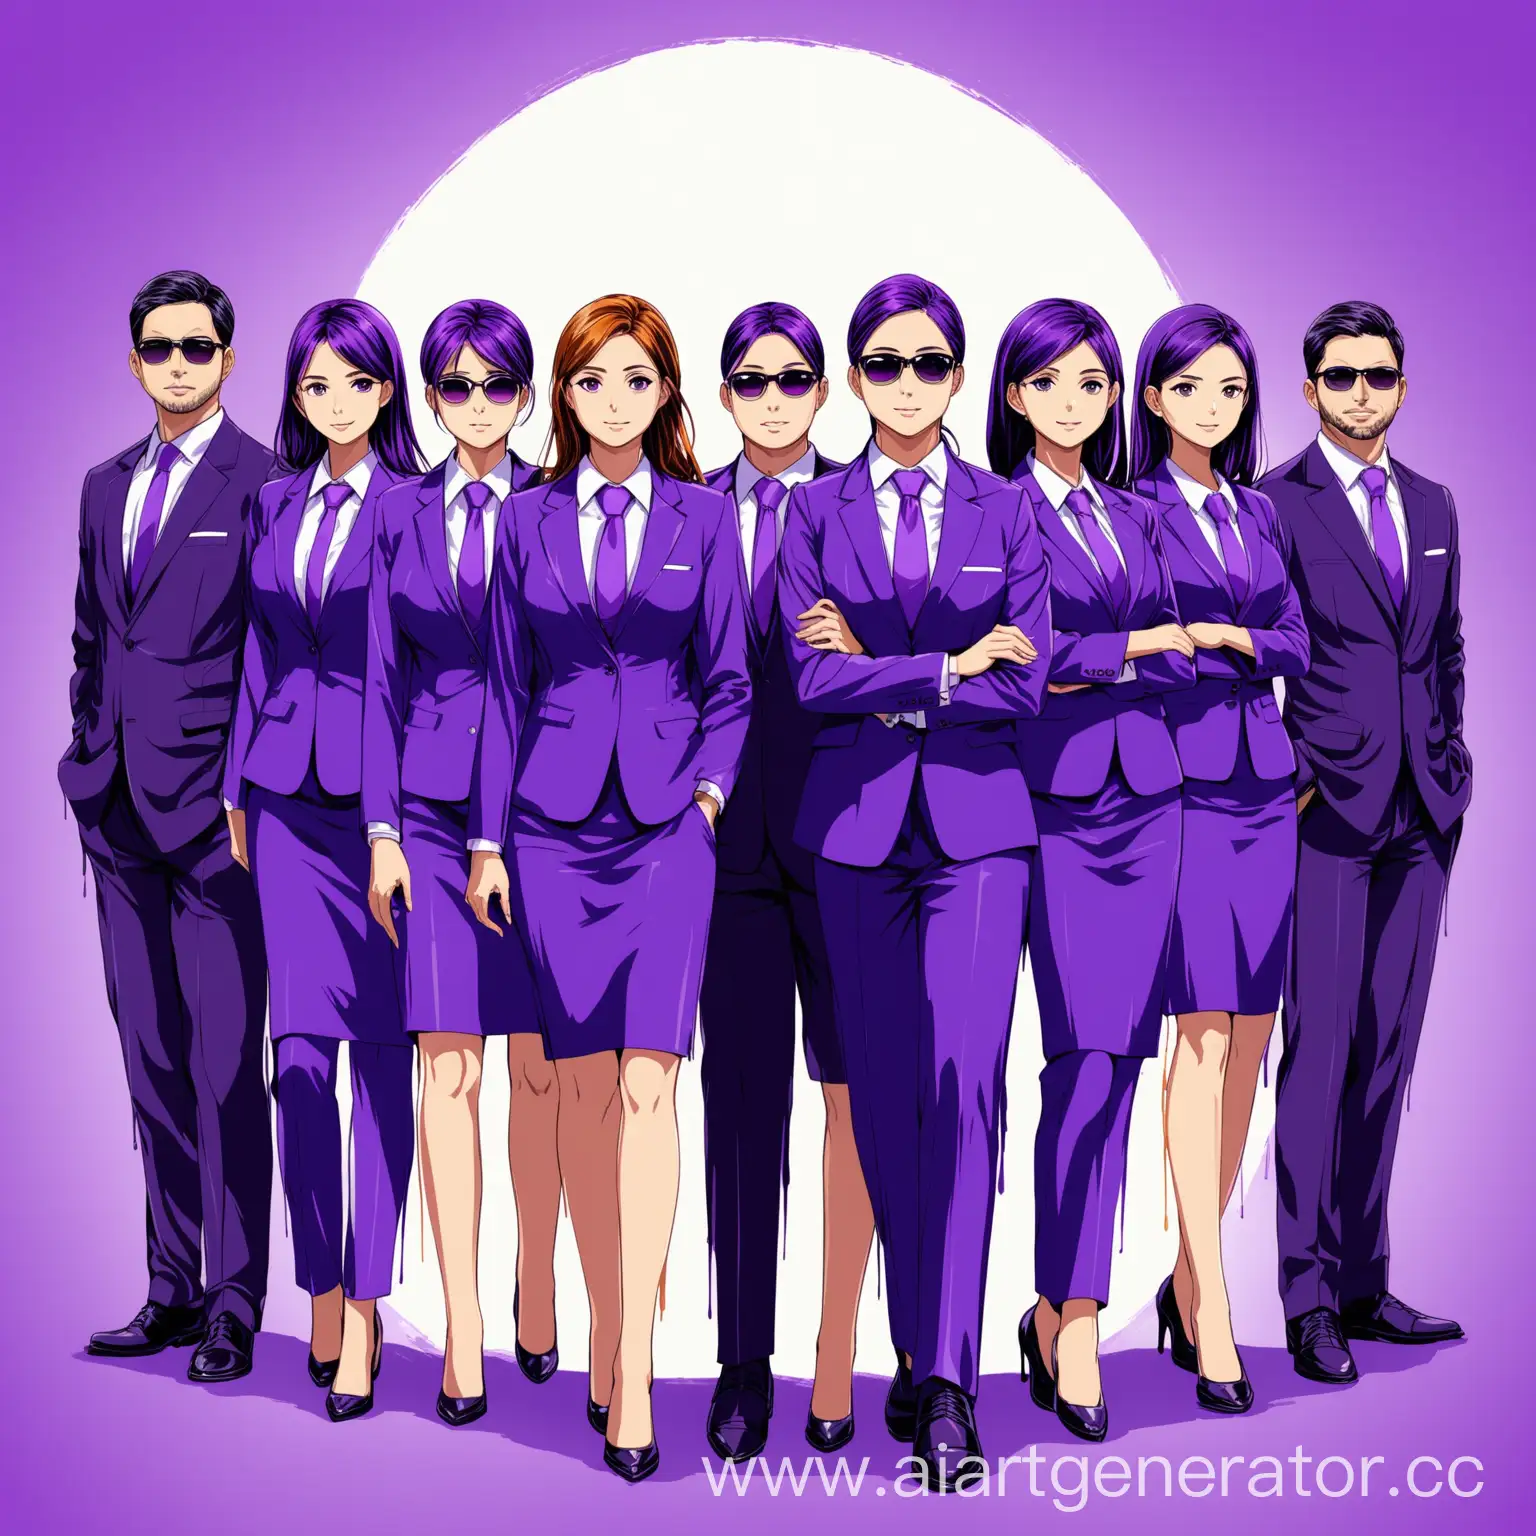 Vibrant-Business-Conference-Poster-Diverse-Professionals-in-Purple-Suits